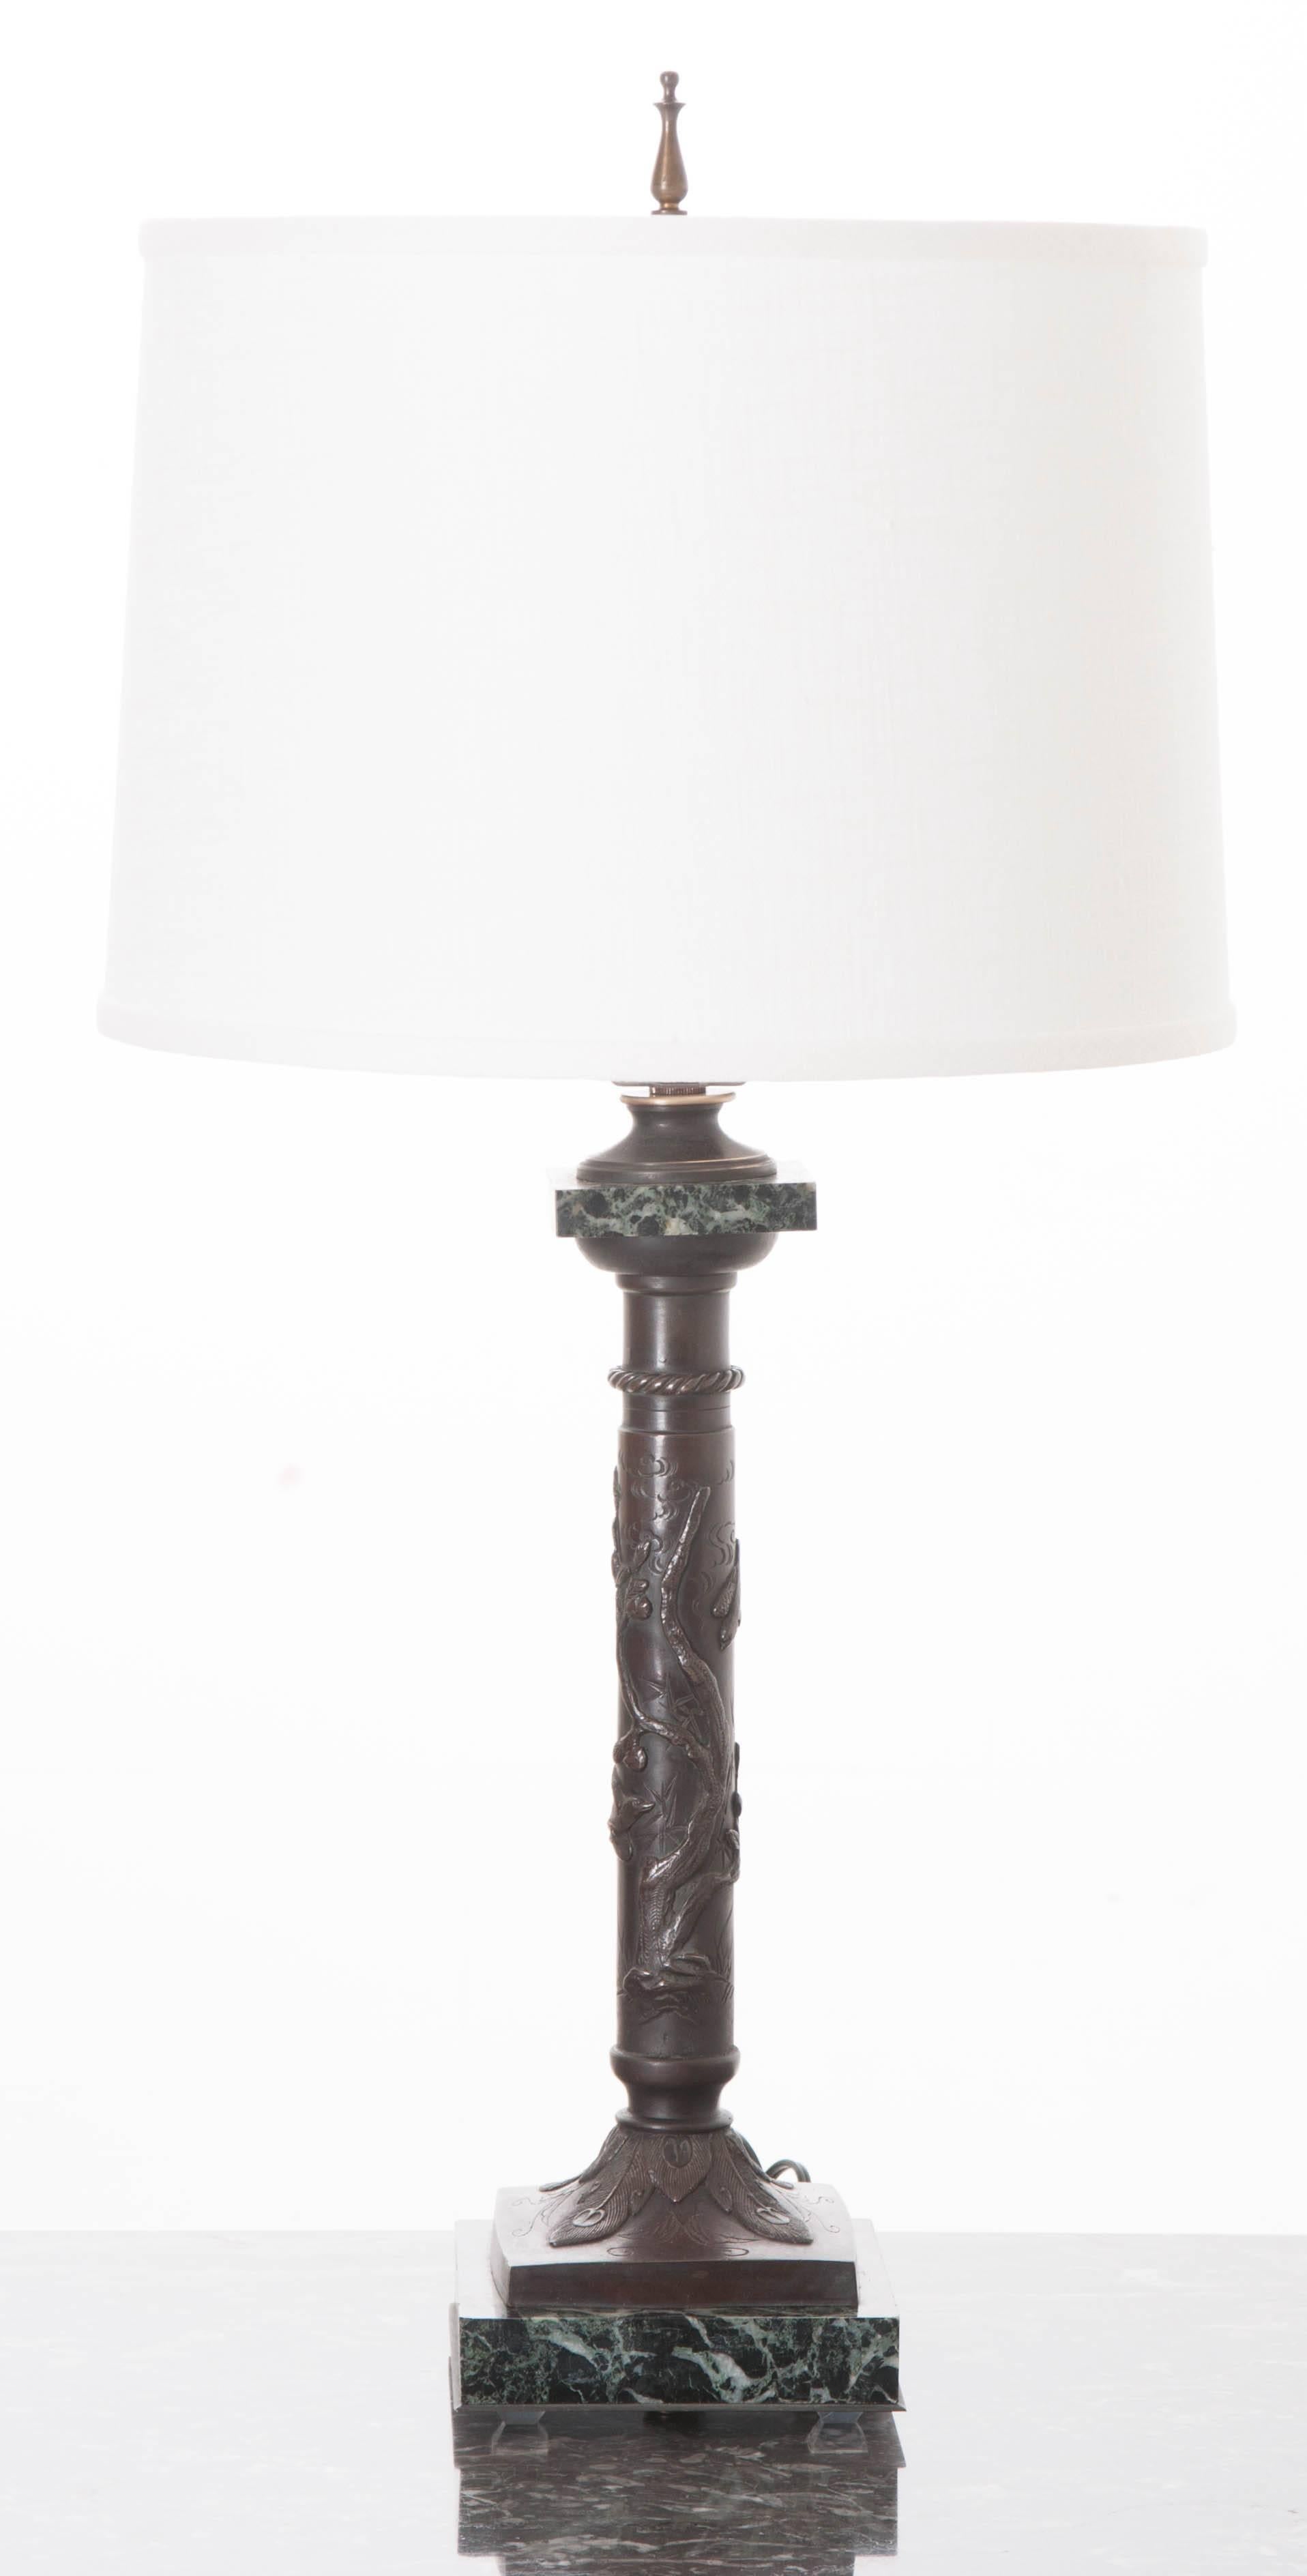 This small, decorative table lamp has been fashioned using an ornate bronze column that rests on a square marble base. The column's shaft features a gnarly tree with sparrows circling in pursuit of its precious fruit. The column's base is decorated